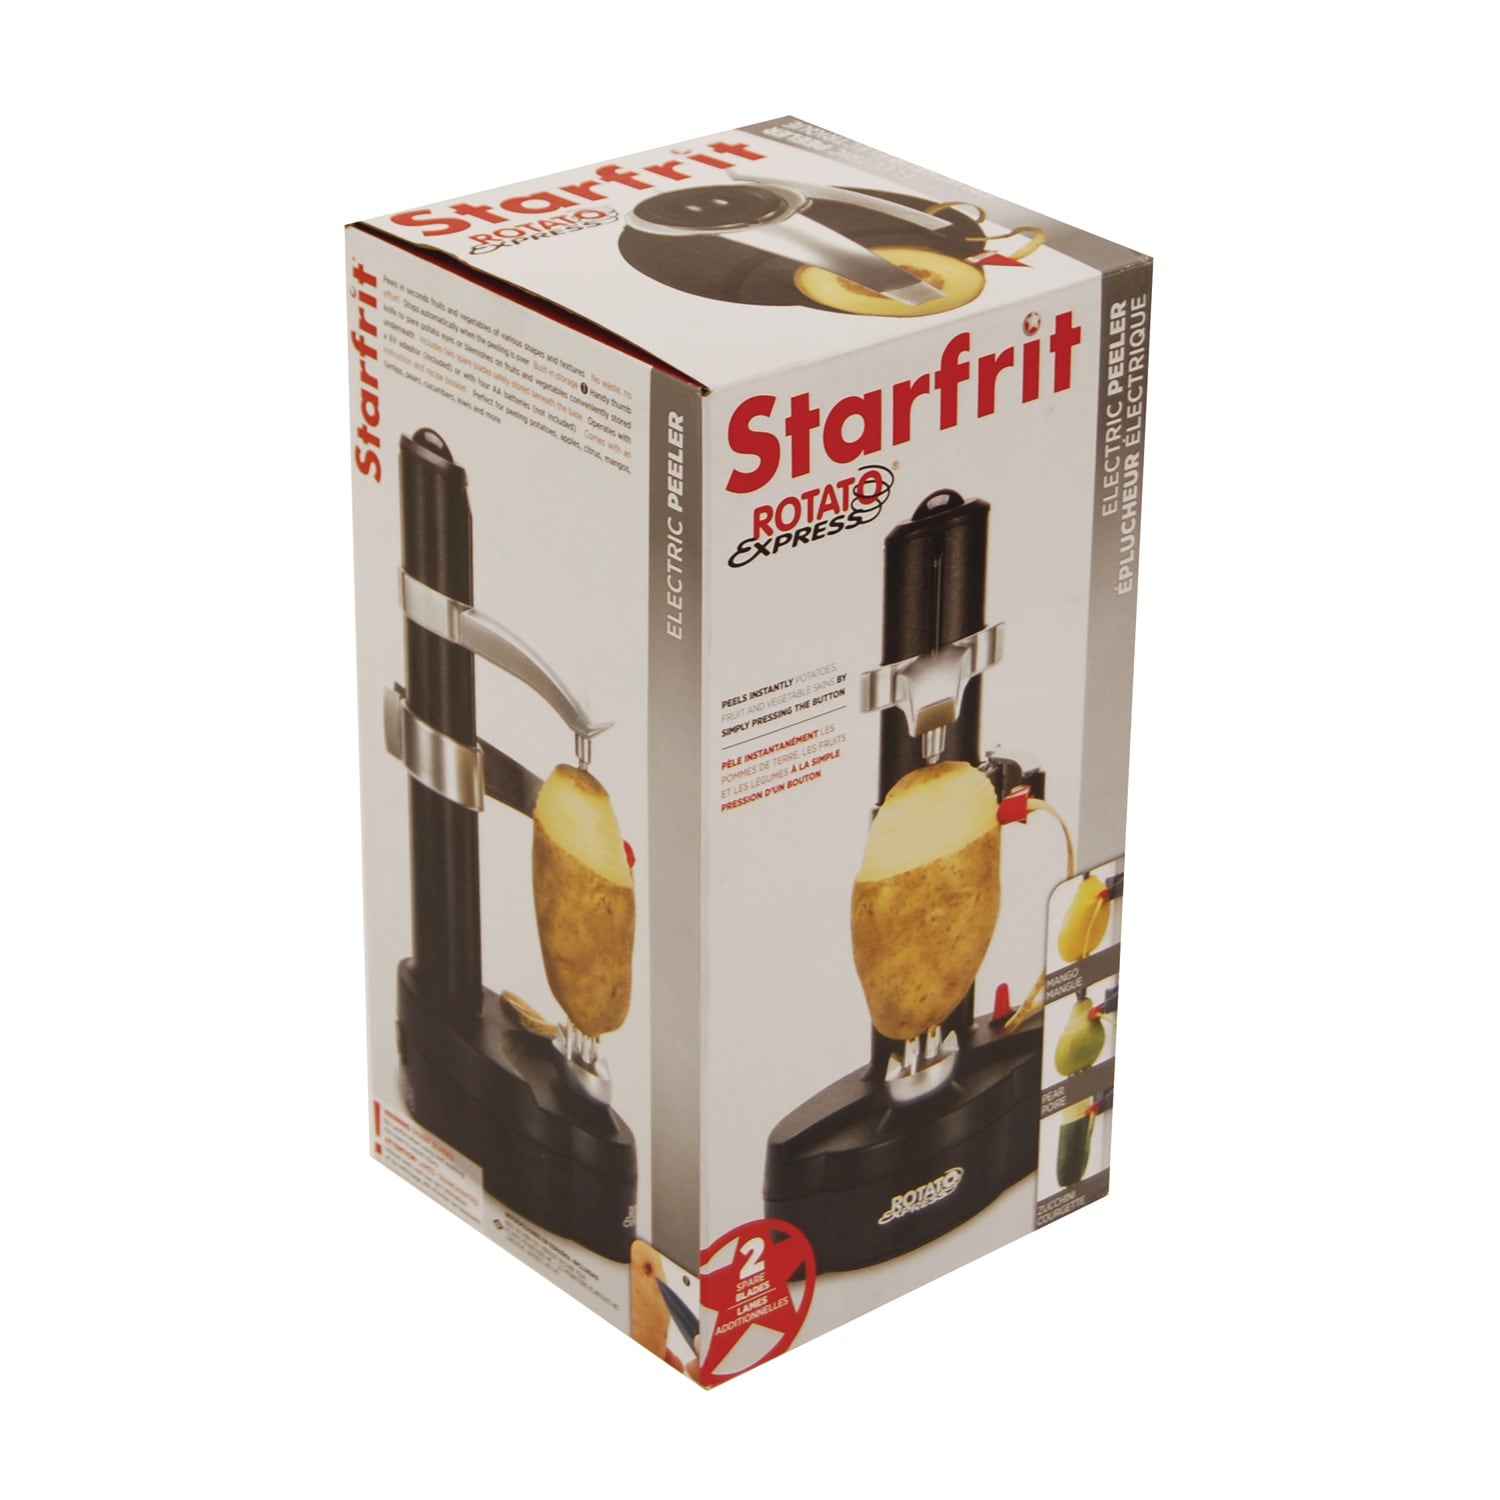 Starfrit Rotato Express Electric Peeler - Instantly Peel Potatoes, Fruits,  and Vegetables - Includes 2 Blades and Thumb Knife in the Food Slicers  department at